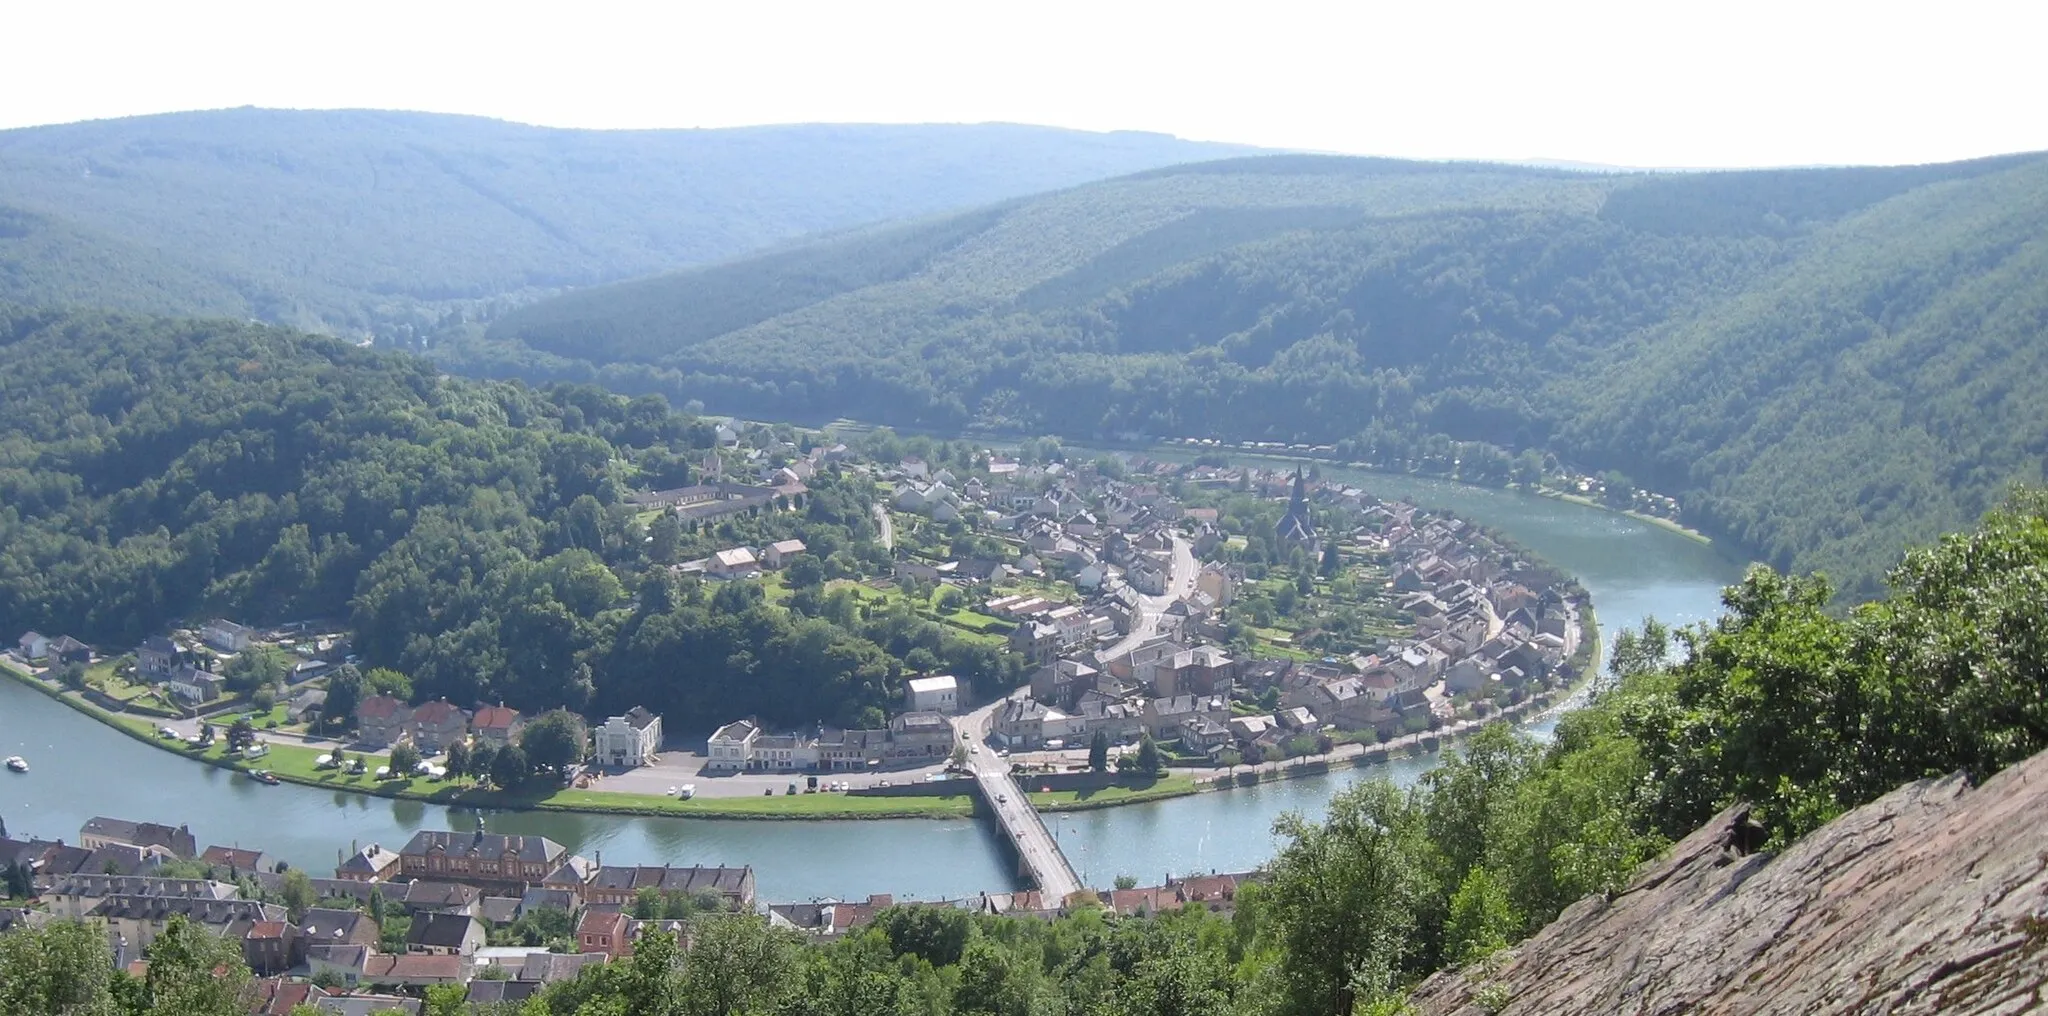 Image of Monthermé